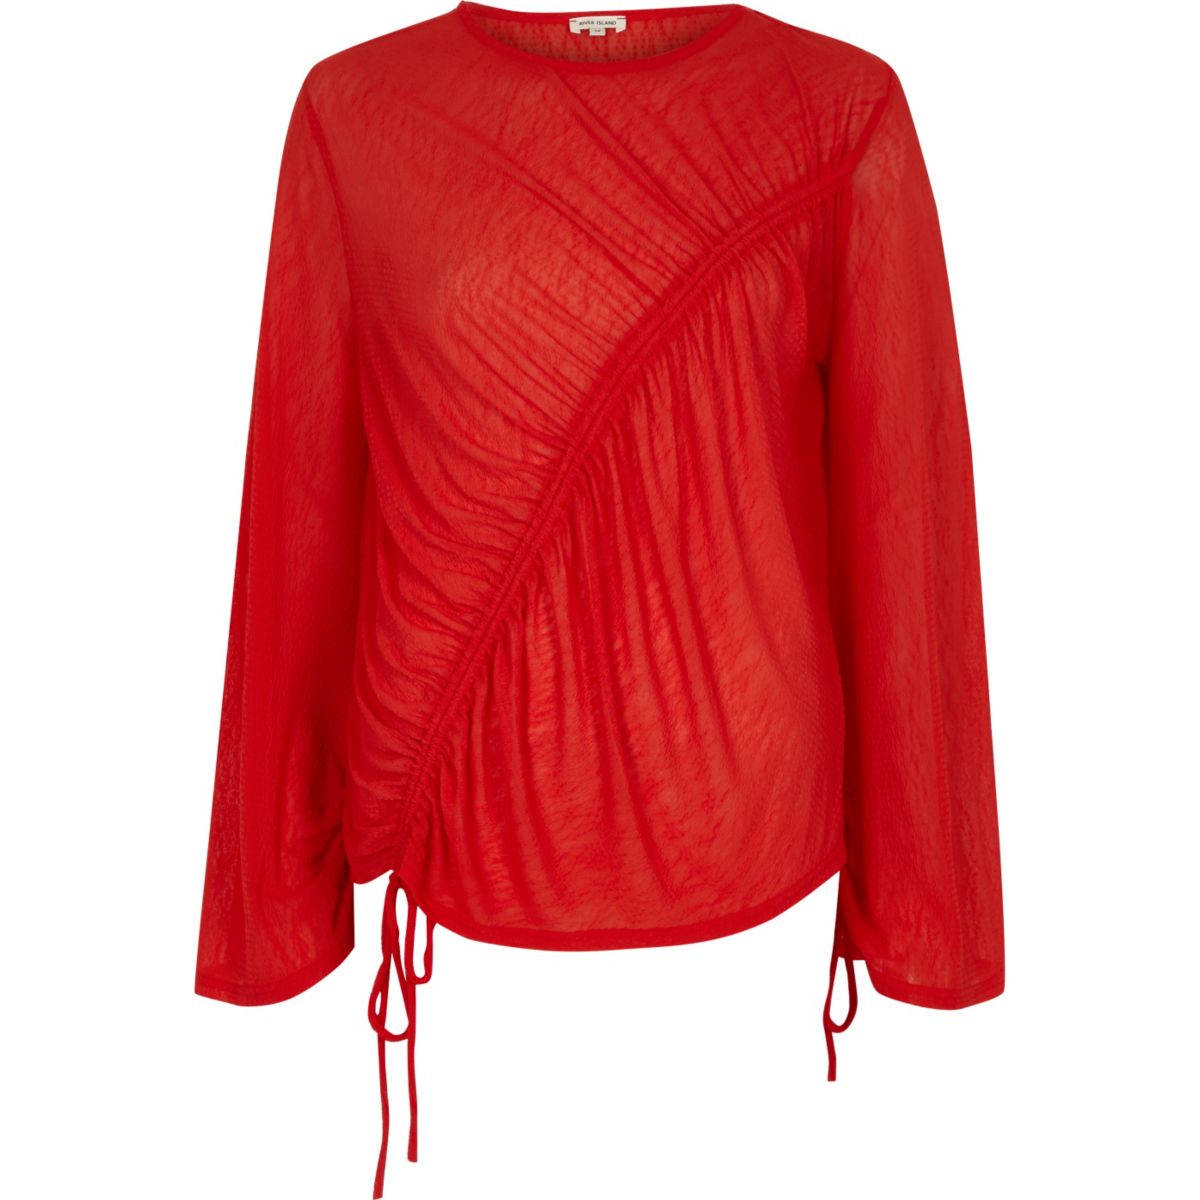 Red asymmetric ruched drawstring top - Workwear - Sale - women